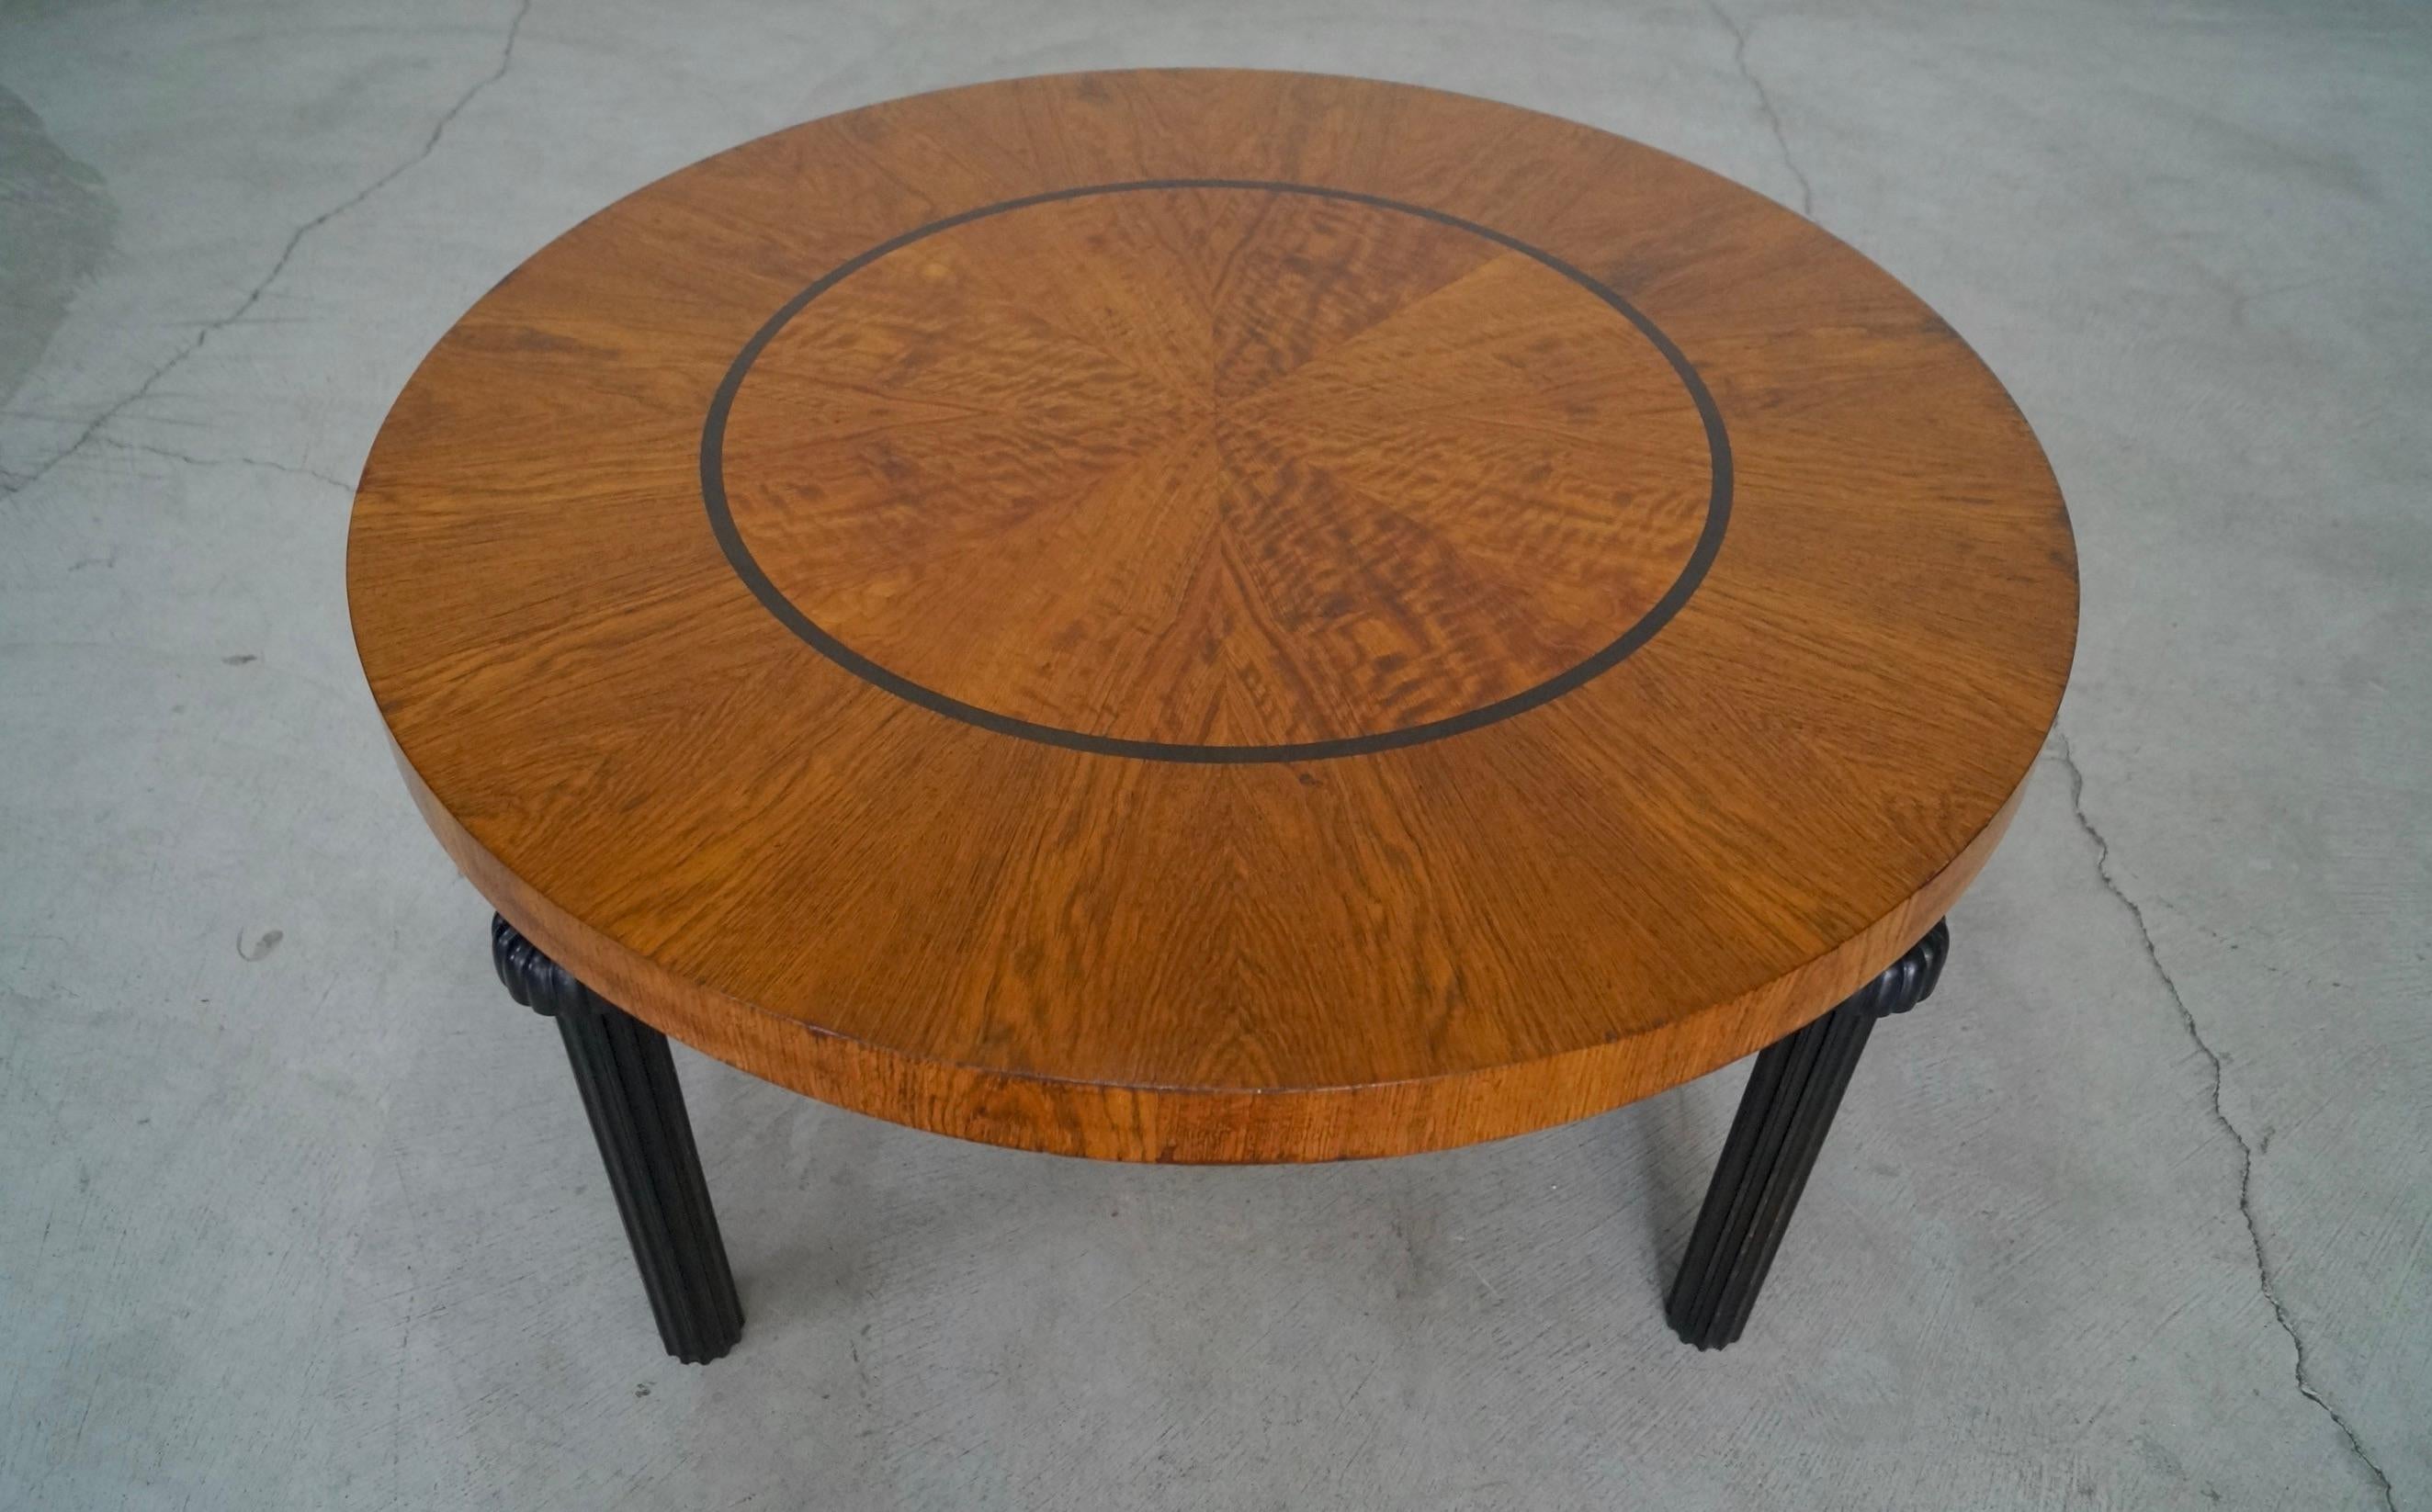 Vintage 1940's original Art Deco coffee table for sale. Beautiful design and style and textured legs. The top has wonderful wood work with a pattern and a circle inlay. It has a walnut finish with black finished legs. It's in good vintage condition